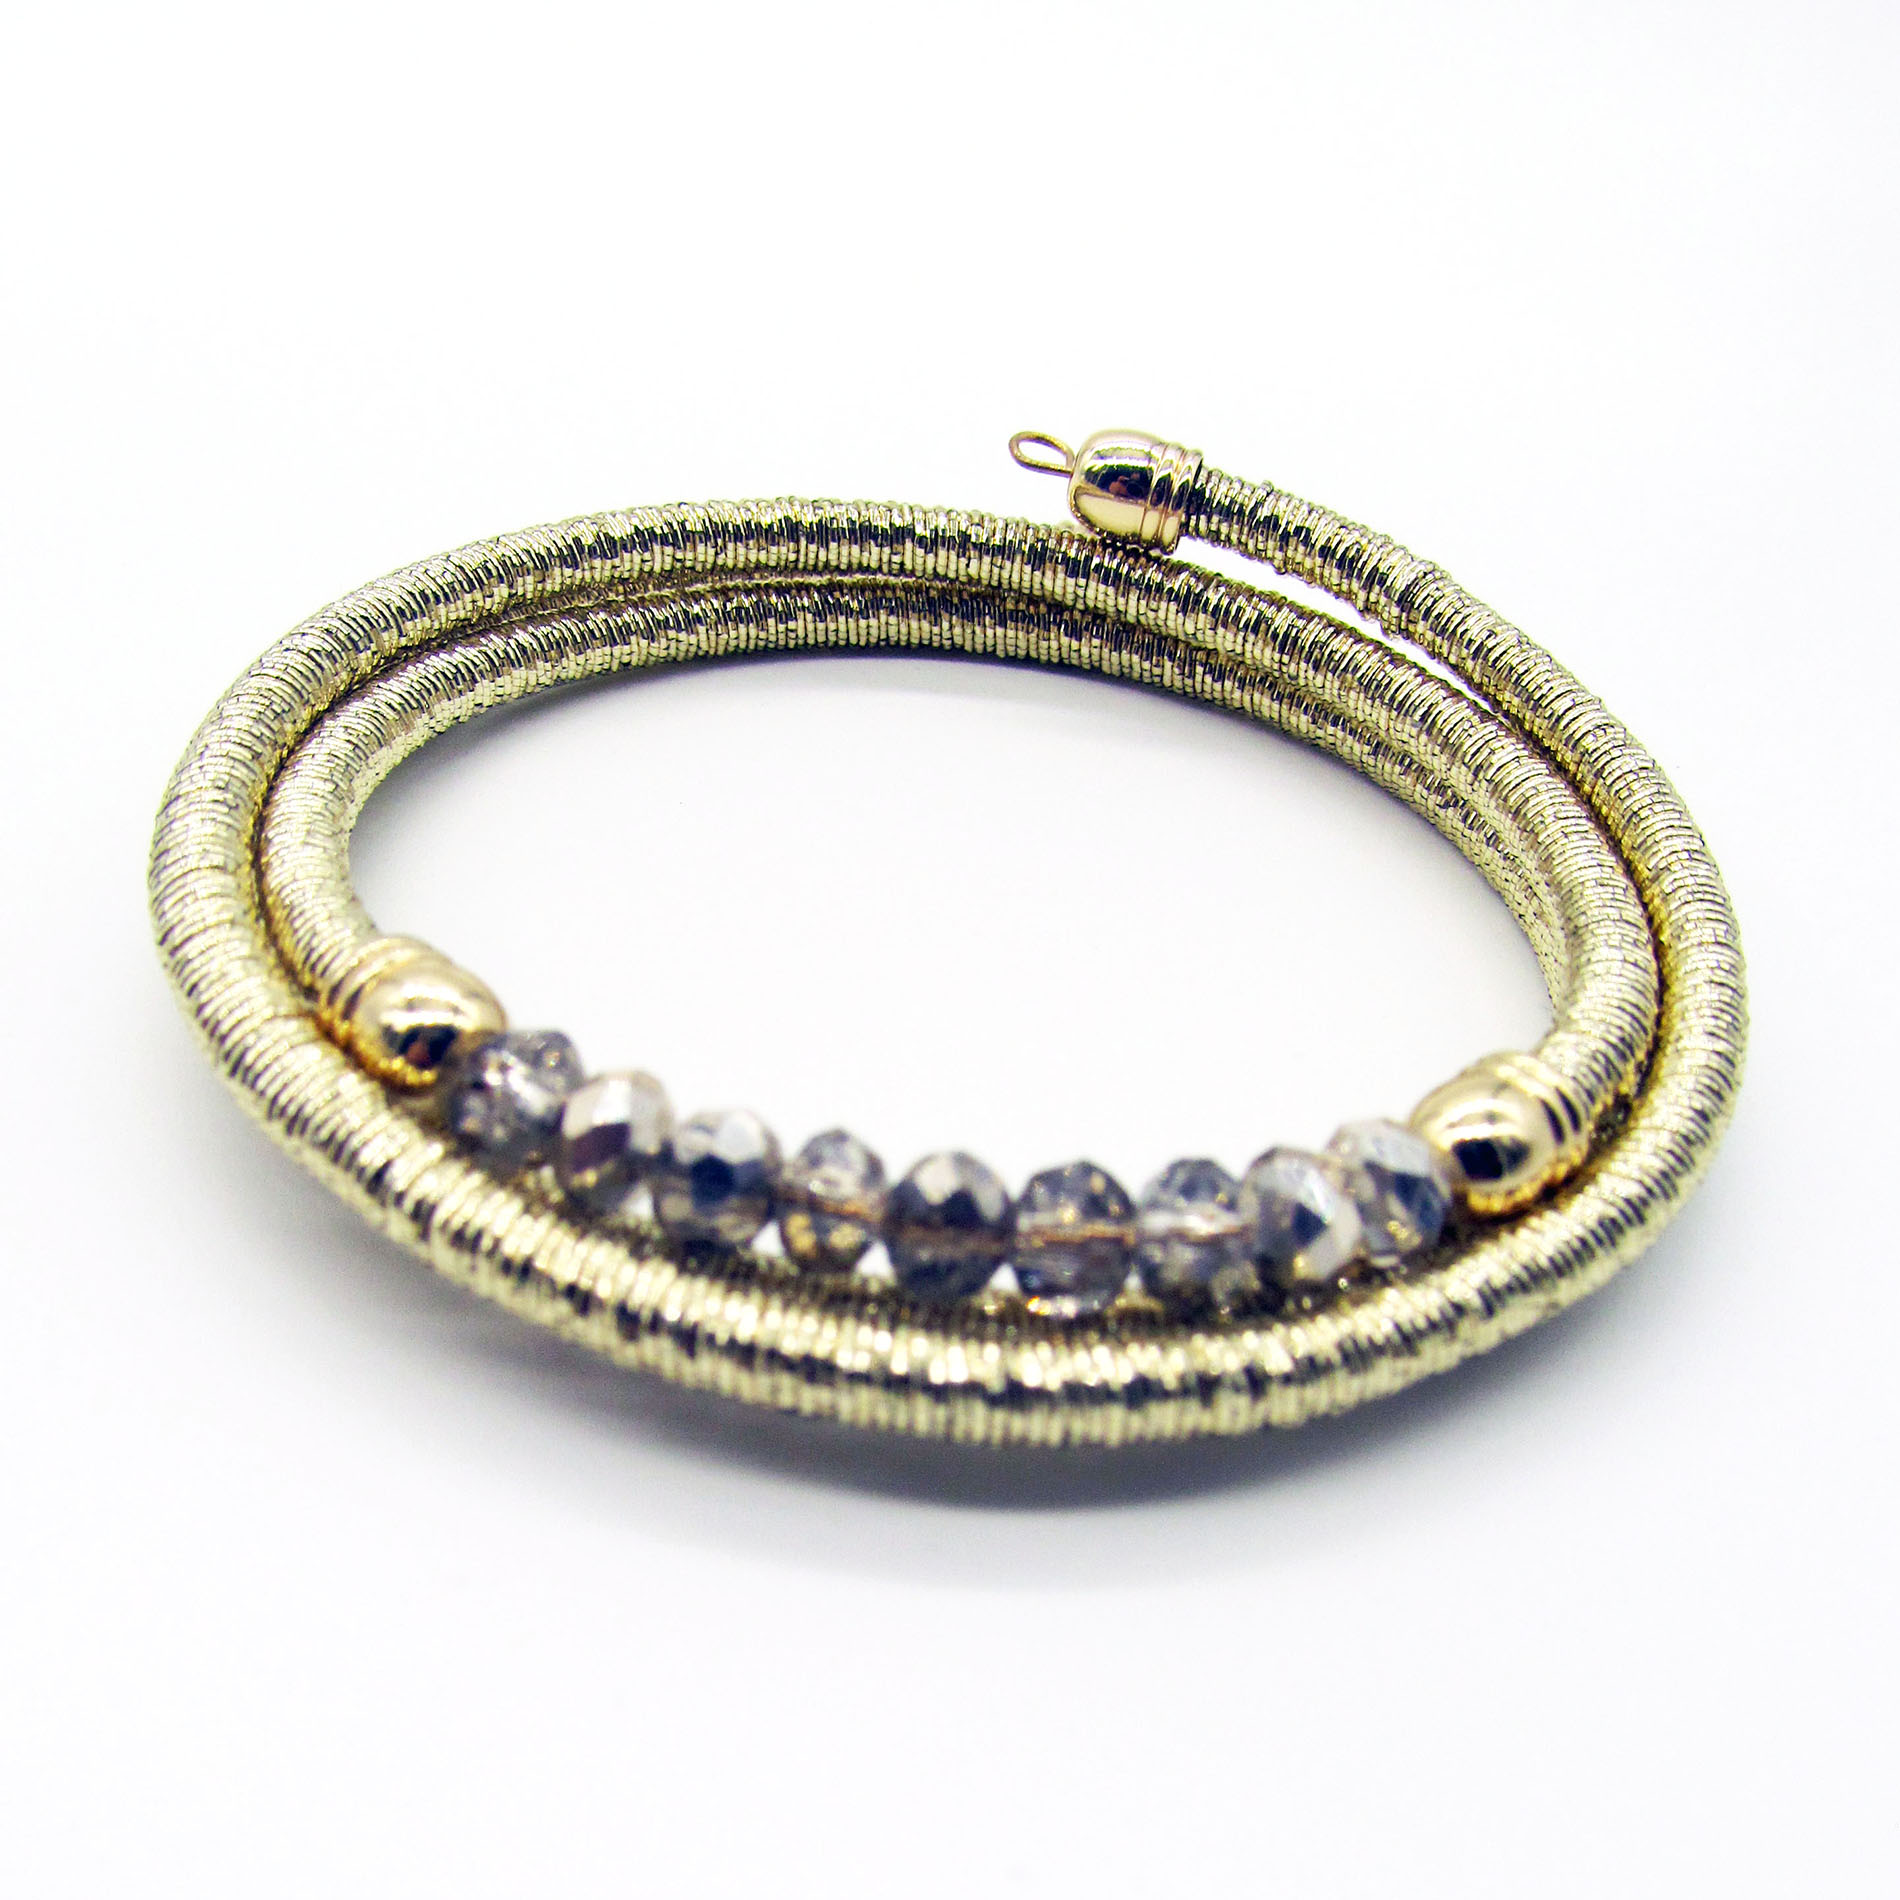 Studio S Gold-Tone Coil Wrap Bracelet with Beads